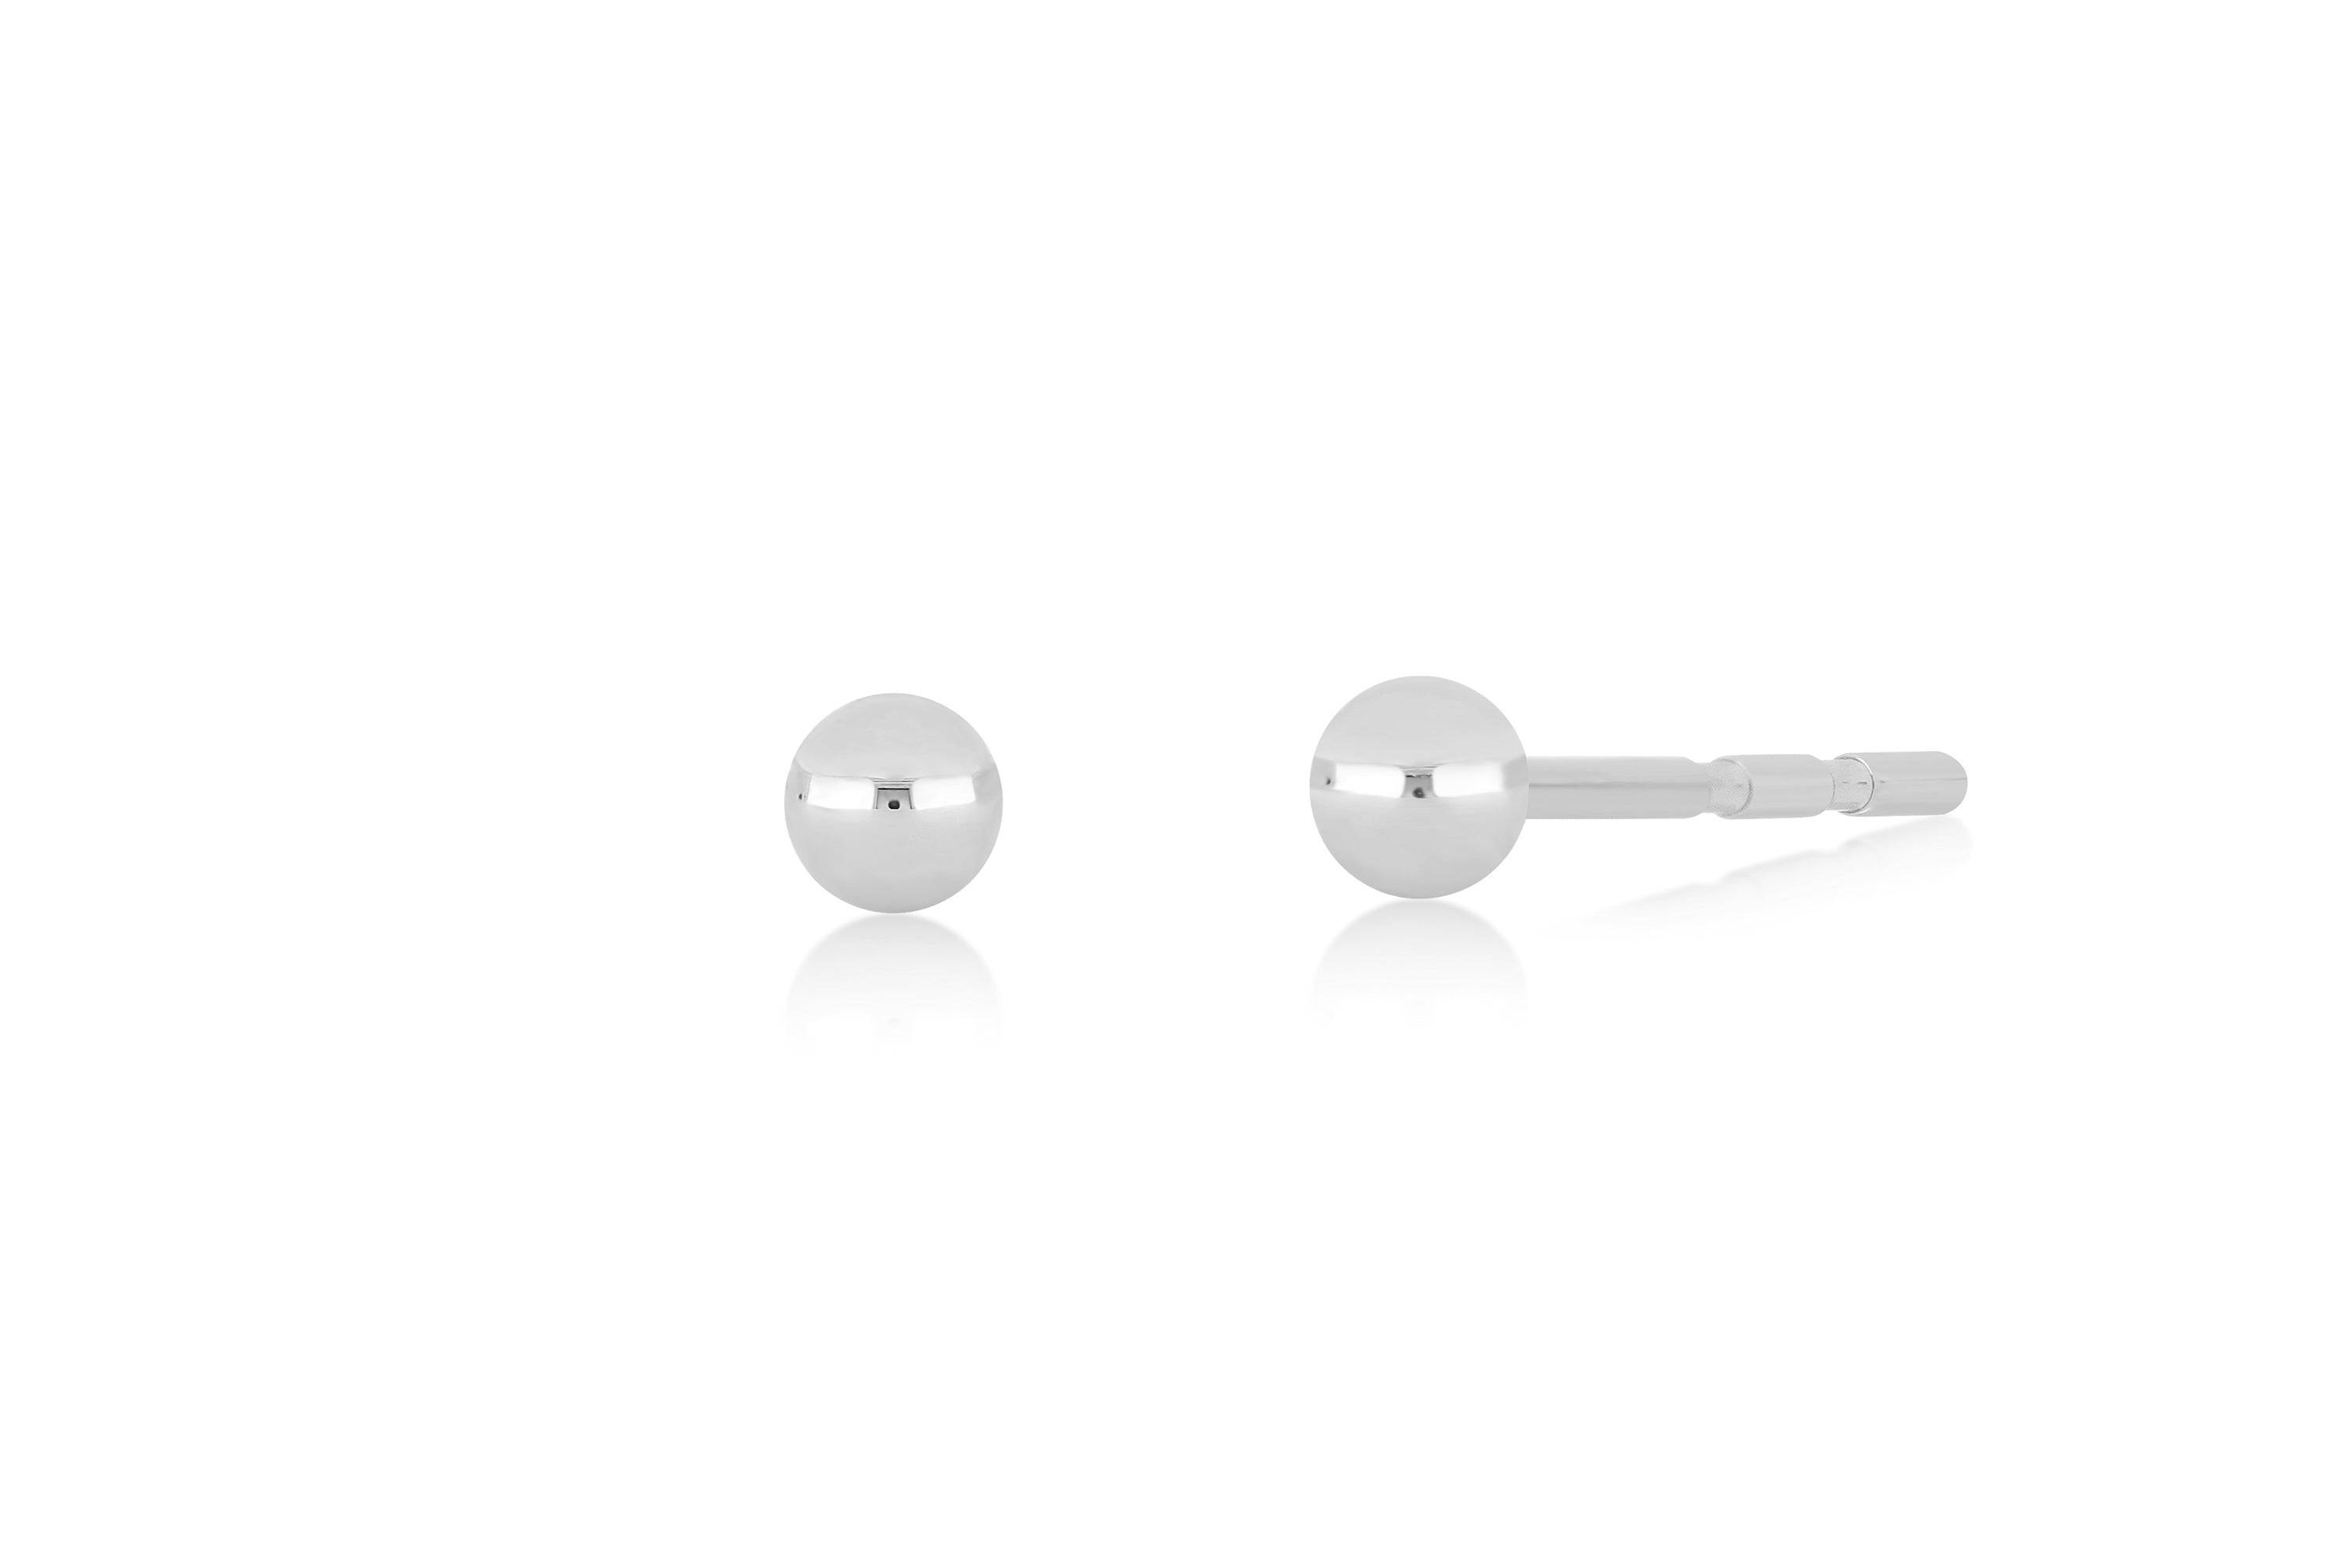 14k (karat) white gold ball stud earring measuring 3mm in height and width